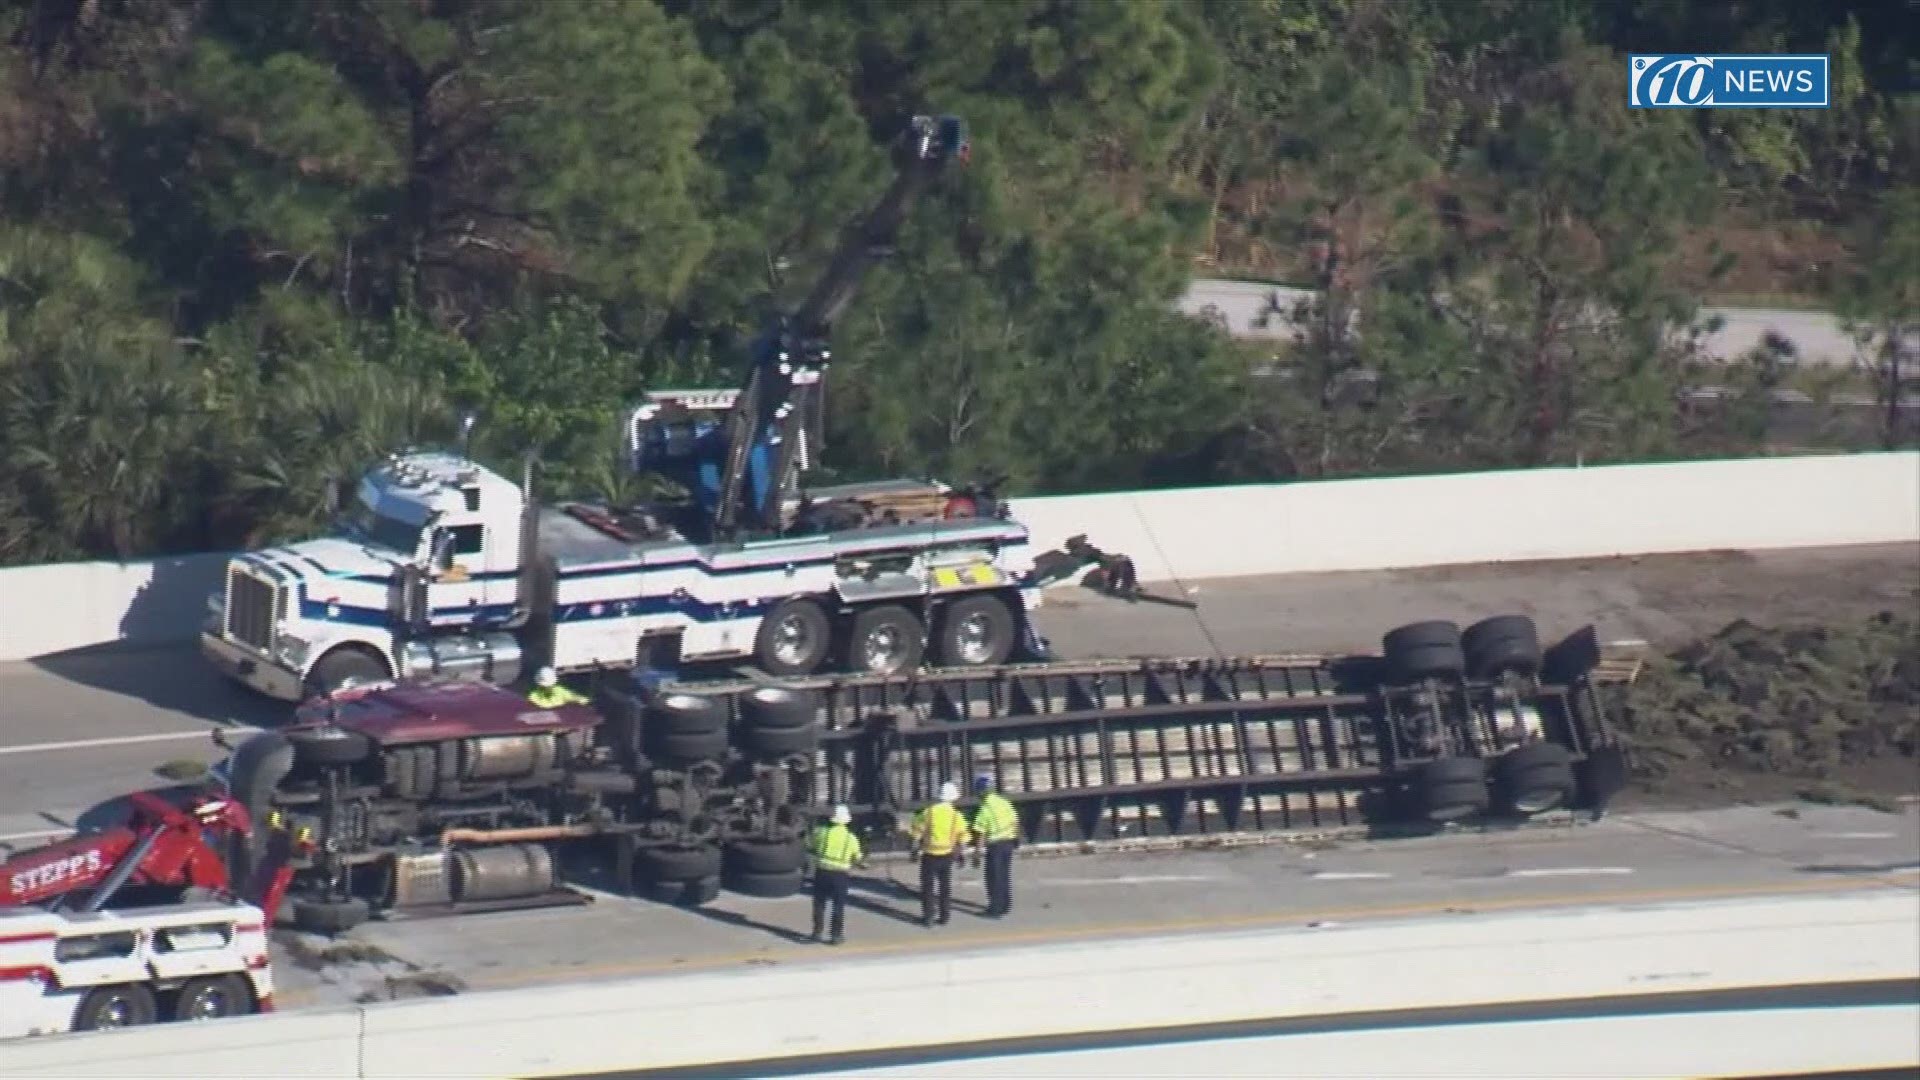 Crews worked to remove an overturned semi-truck and clean up its contents from Interstate 275.